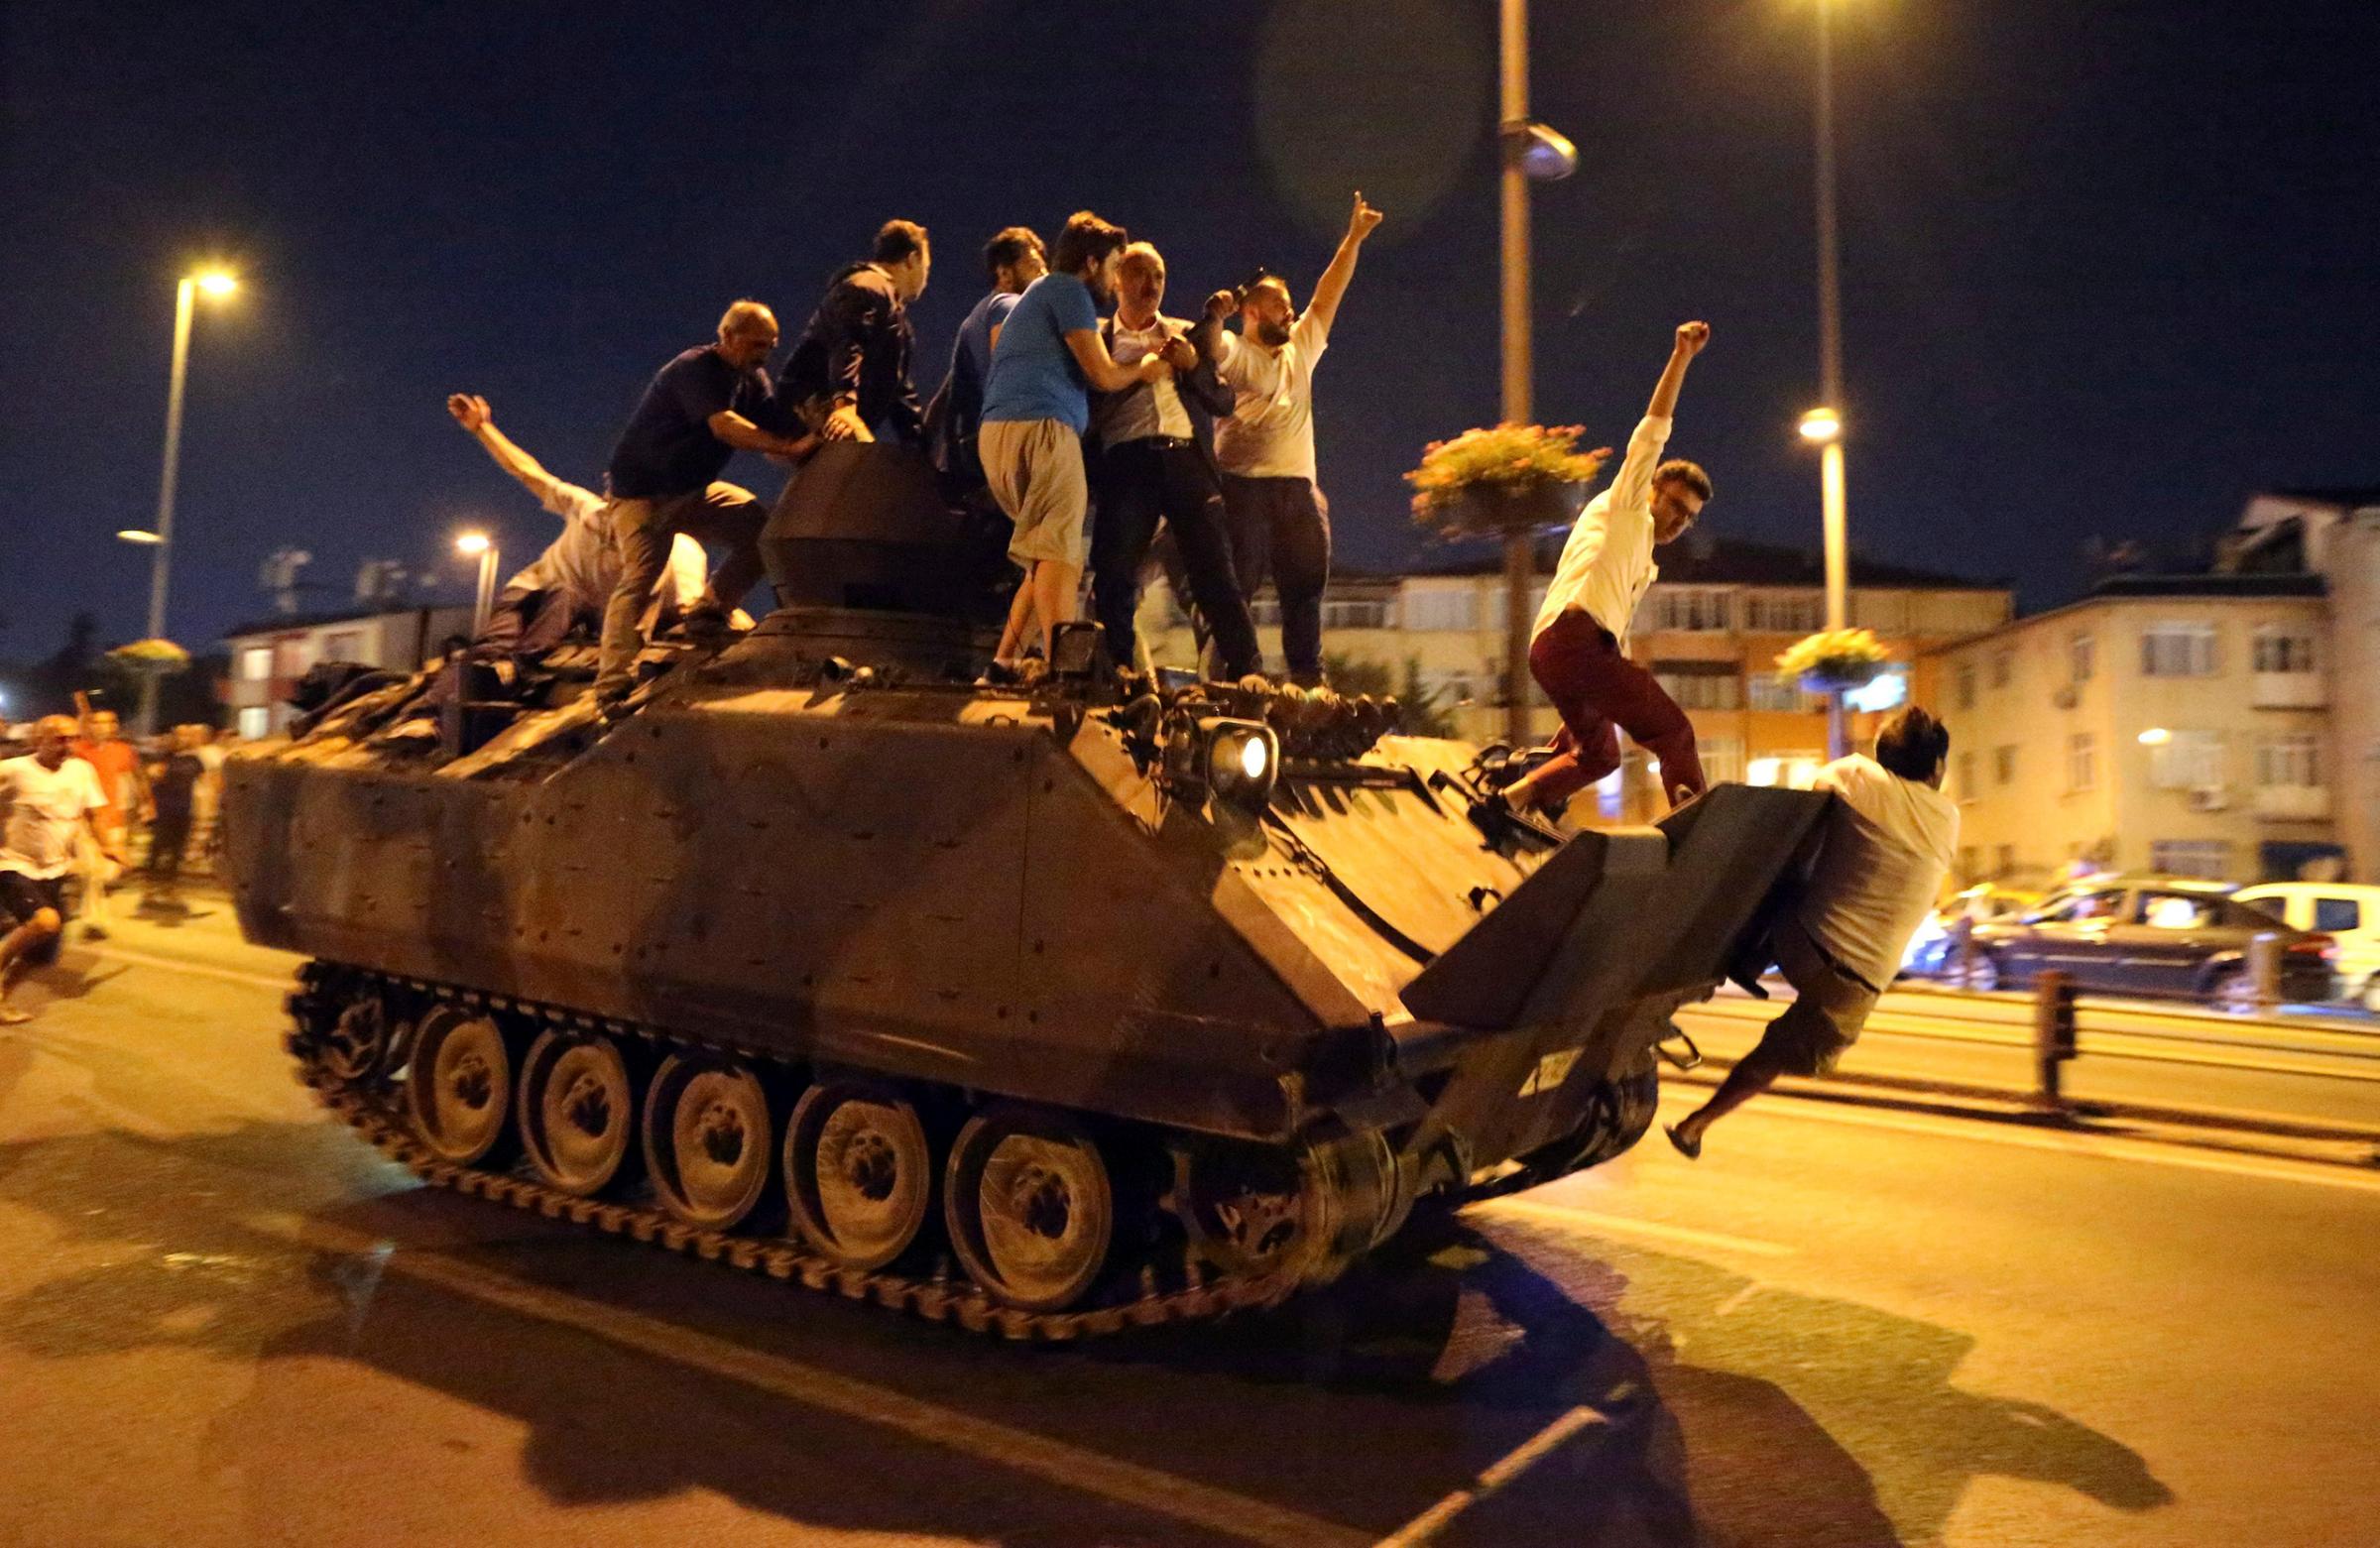 People occupy a tank in Istanbul, Turkey, on July 16, 2016. Turkish Prime Minister Yildirim reportedly said that the Turkish military was involved in an attempted coup d'etat. The Turkish military meanwhile stated it had taken over control.